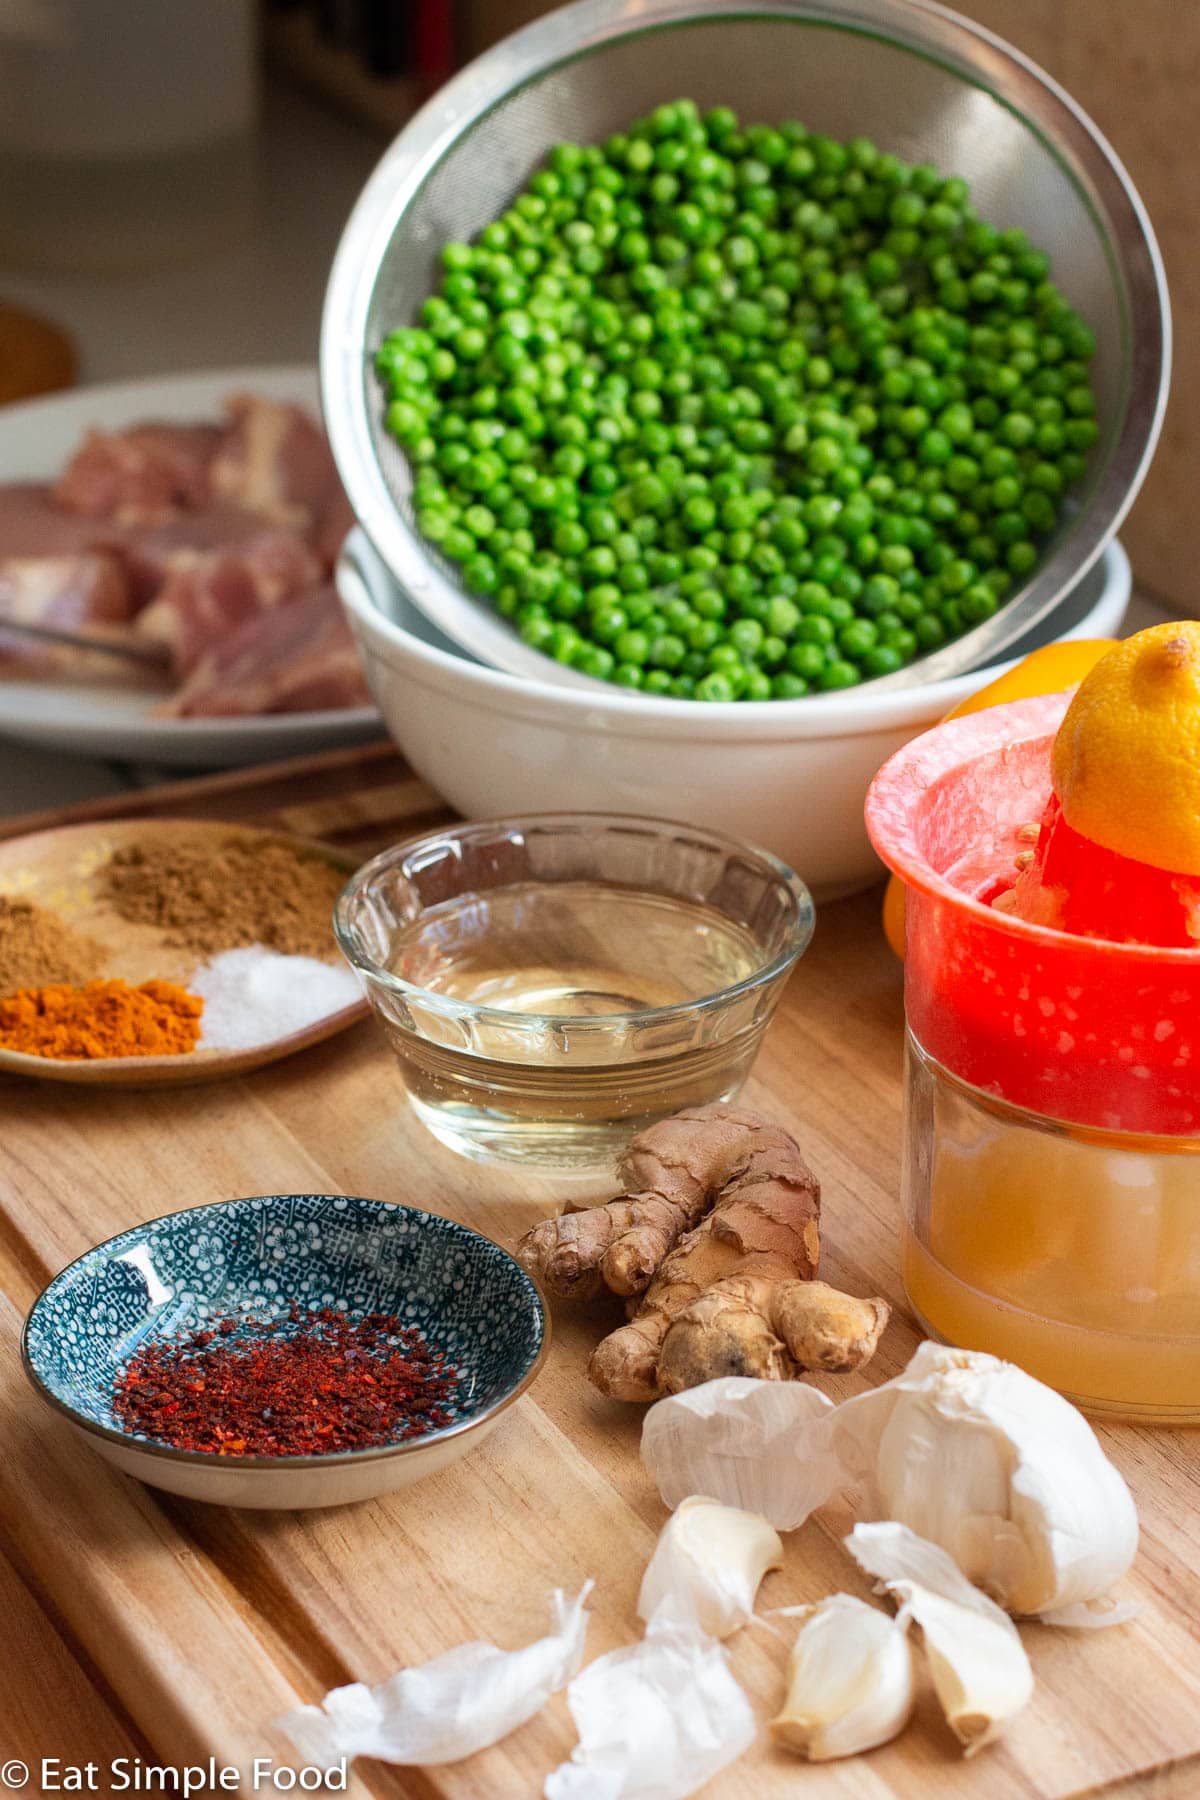 Raw ingredients on a wood cutting board: garlic cloves, lemon juice and juicer with lemon on it, ginger knob, bowl of white wine, bowl of chili pepper flakes, small plate of spices, strainer of vibrant green peas.